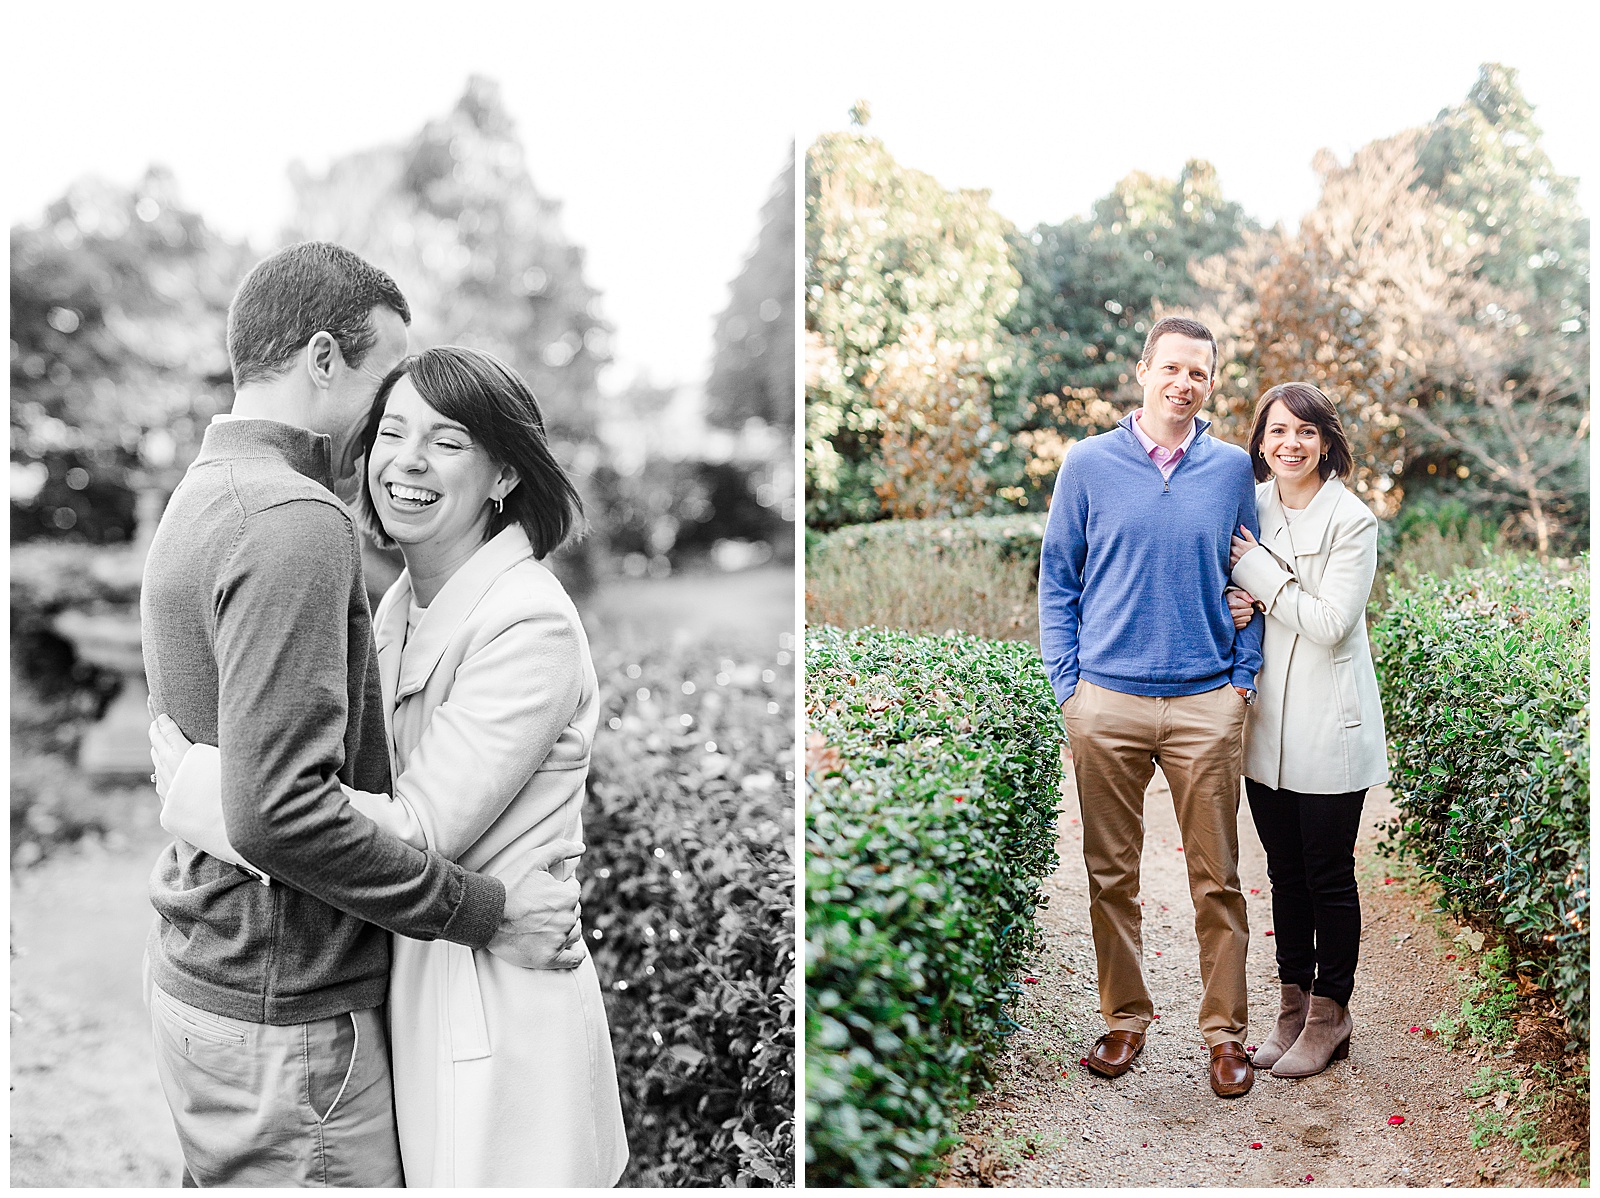 Sweet Couple Walking in Park for Outdoor Winter Engagement Session in NC - white coat, short brown hair bride outfit ideas